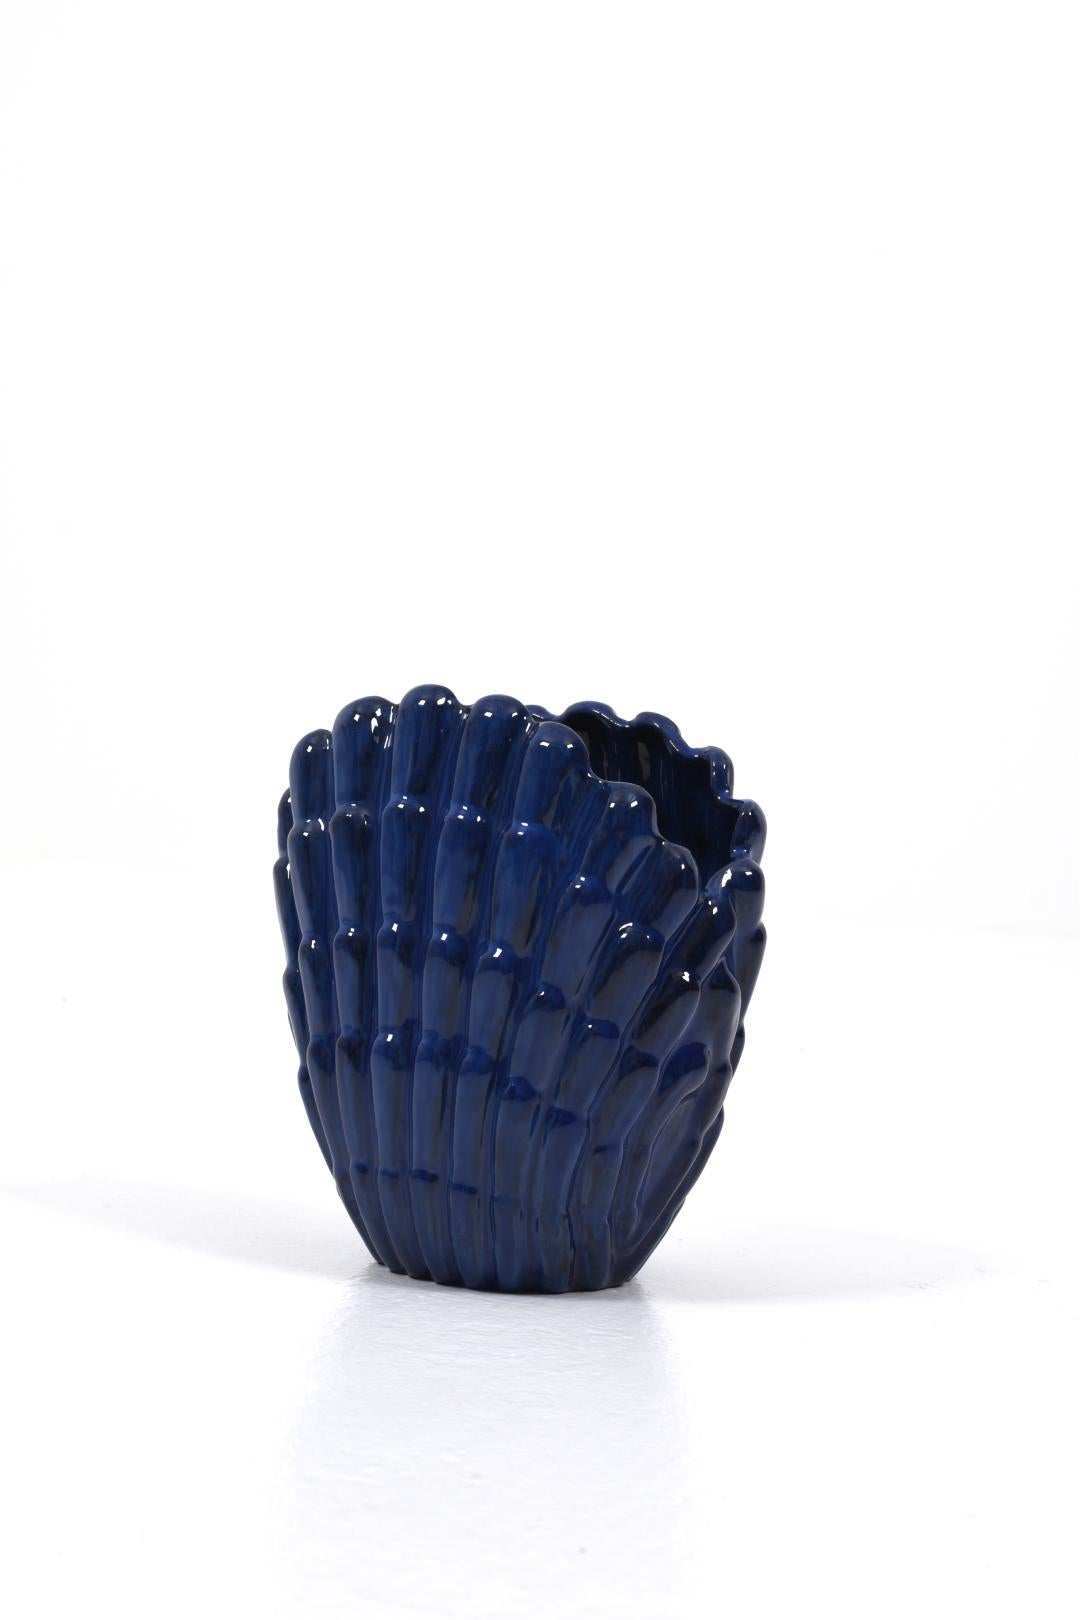 The shell vase is an impressive interior detail that can be used to create a focal point in the room. You can place it alone on a side table, shelf or windowsill, or use it as a beautiful base to display flowers or greenery. No matter how you choose